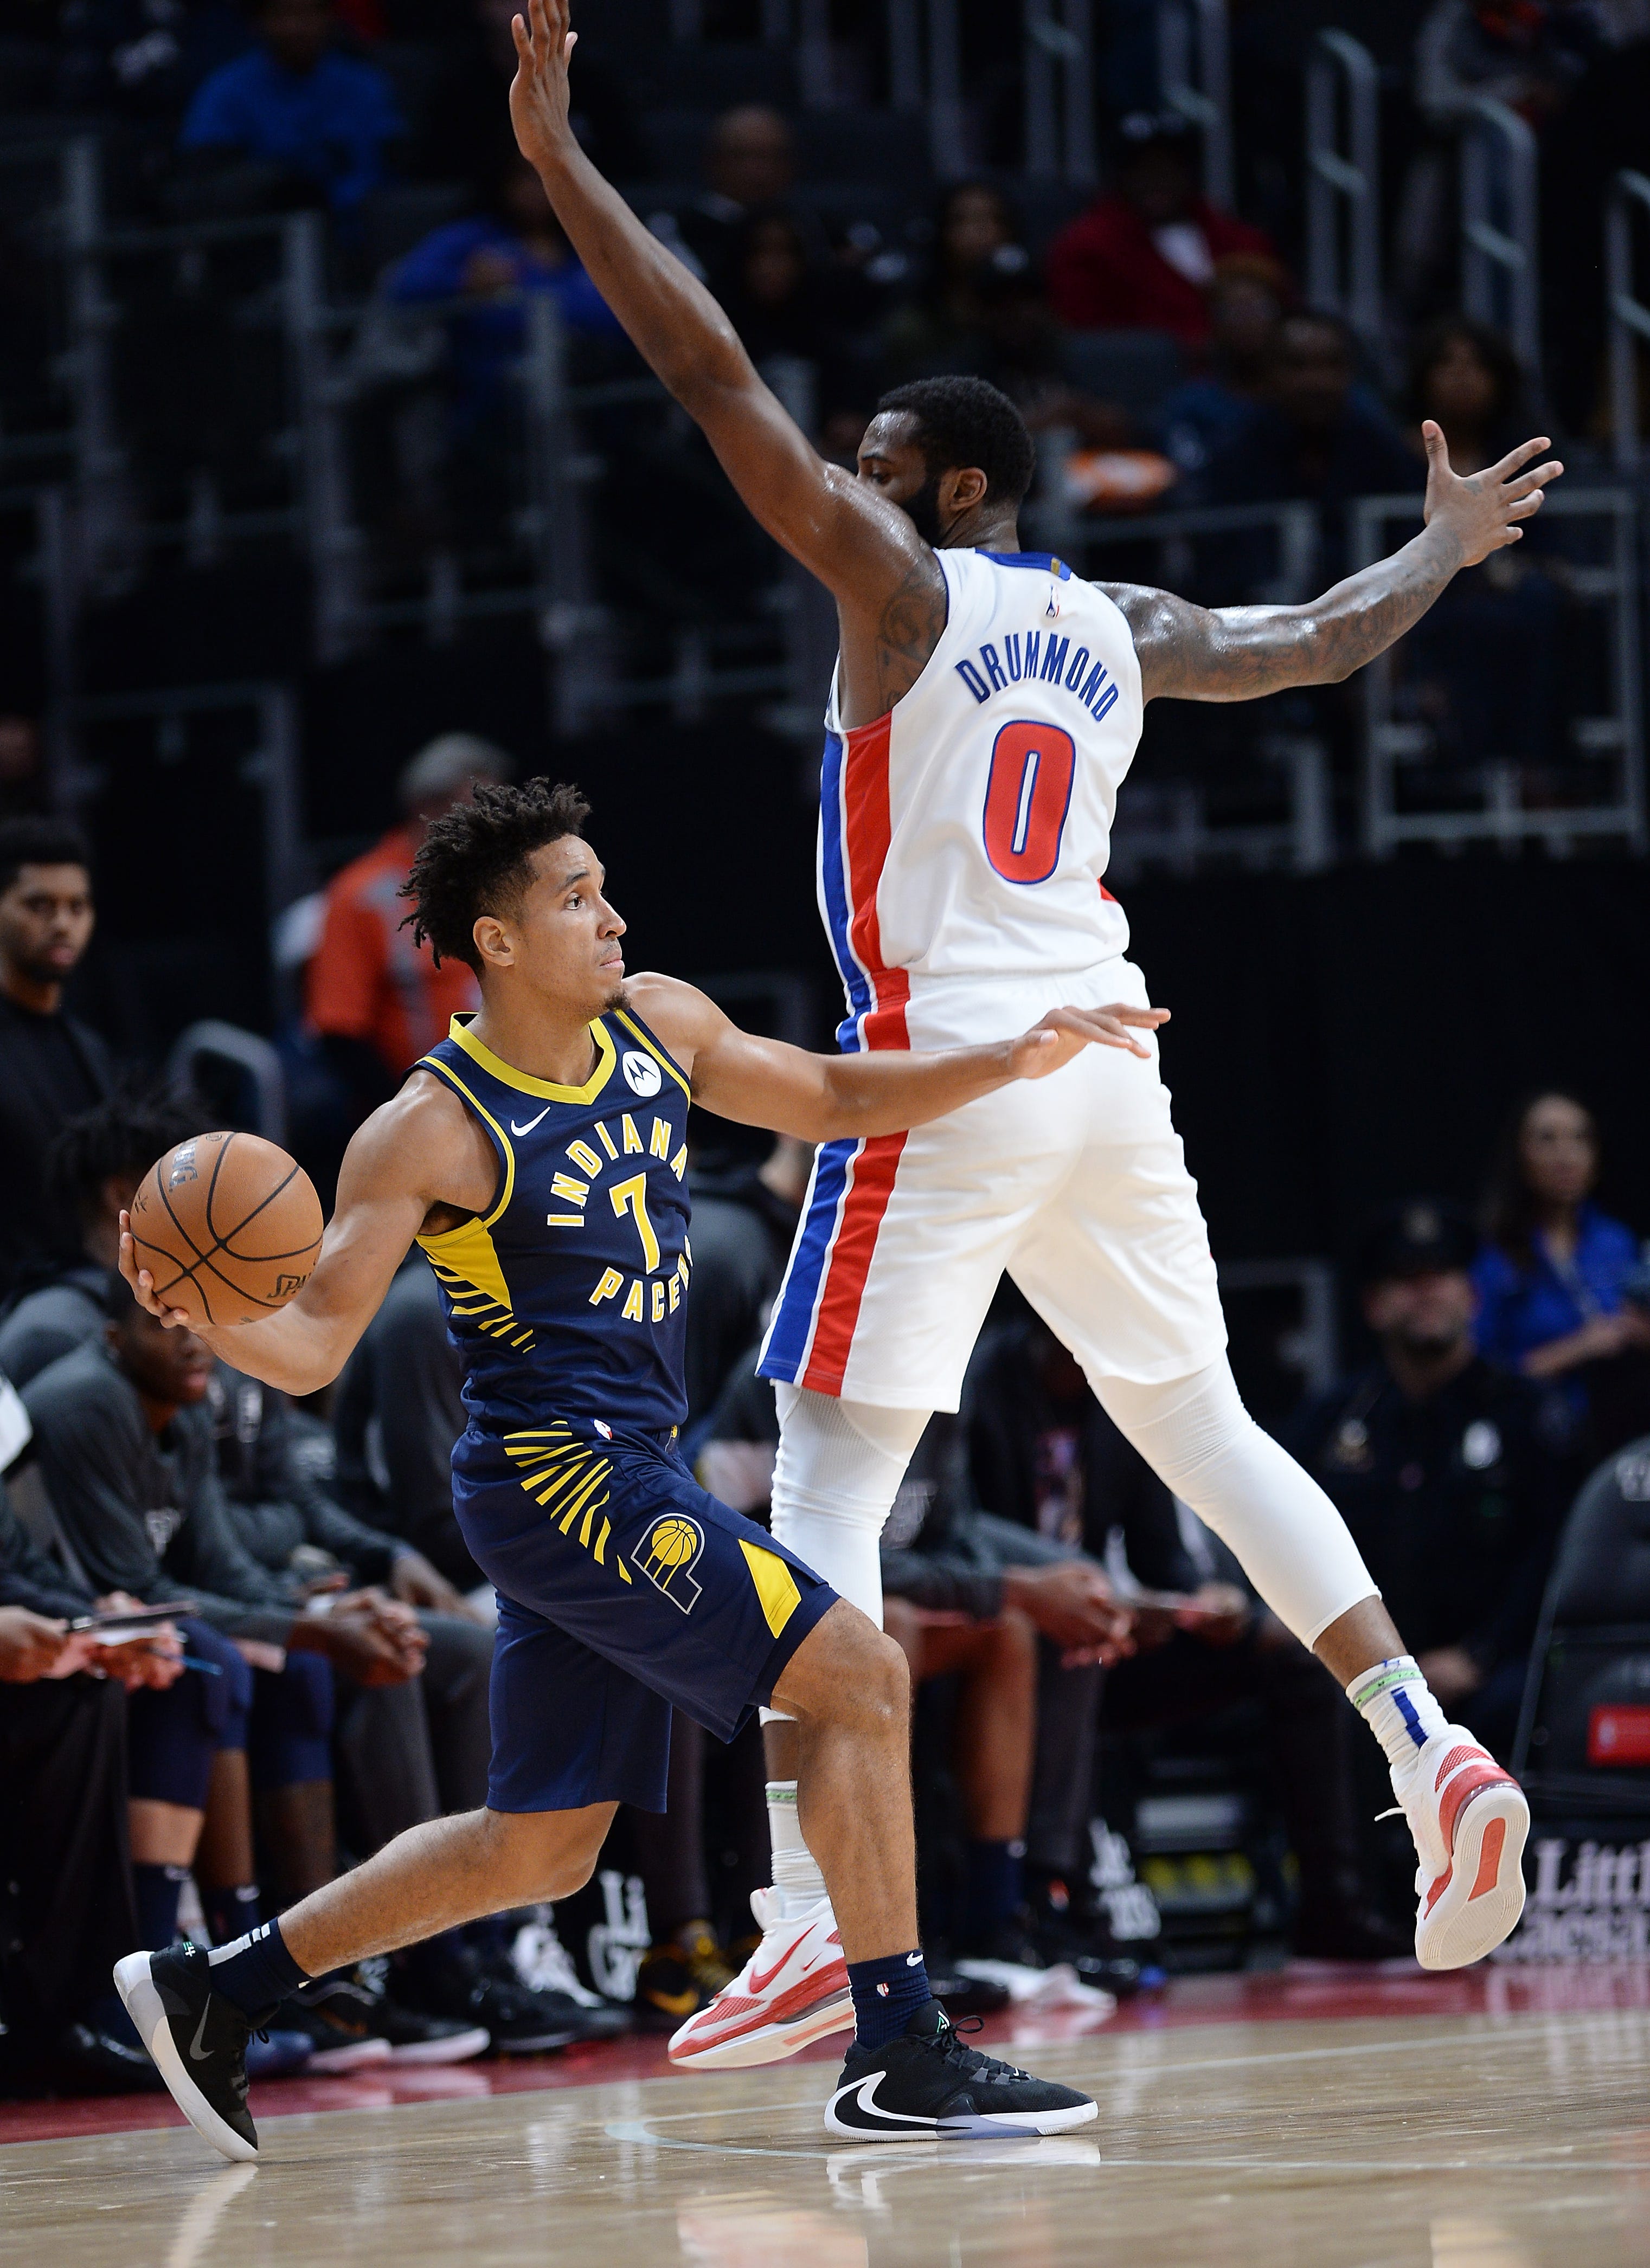 Pistons' Andre Drummond defends the Pacers' Malcolm Brogdon in the first quarter.